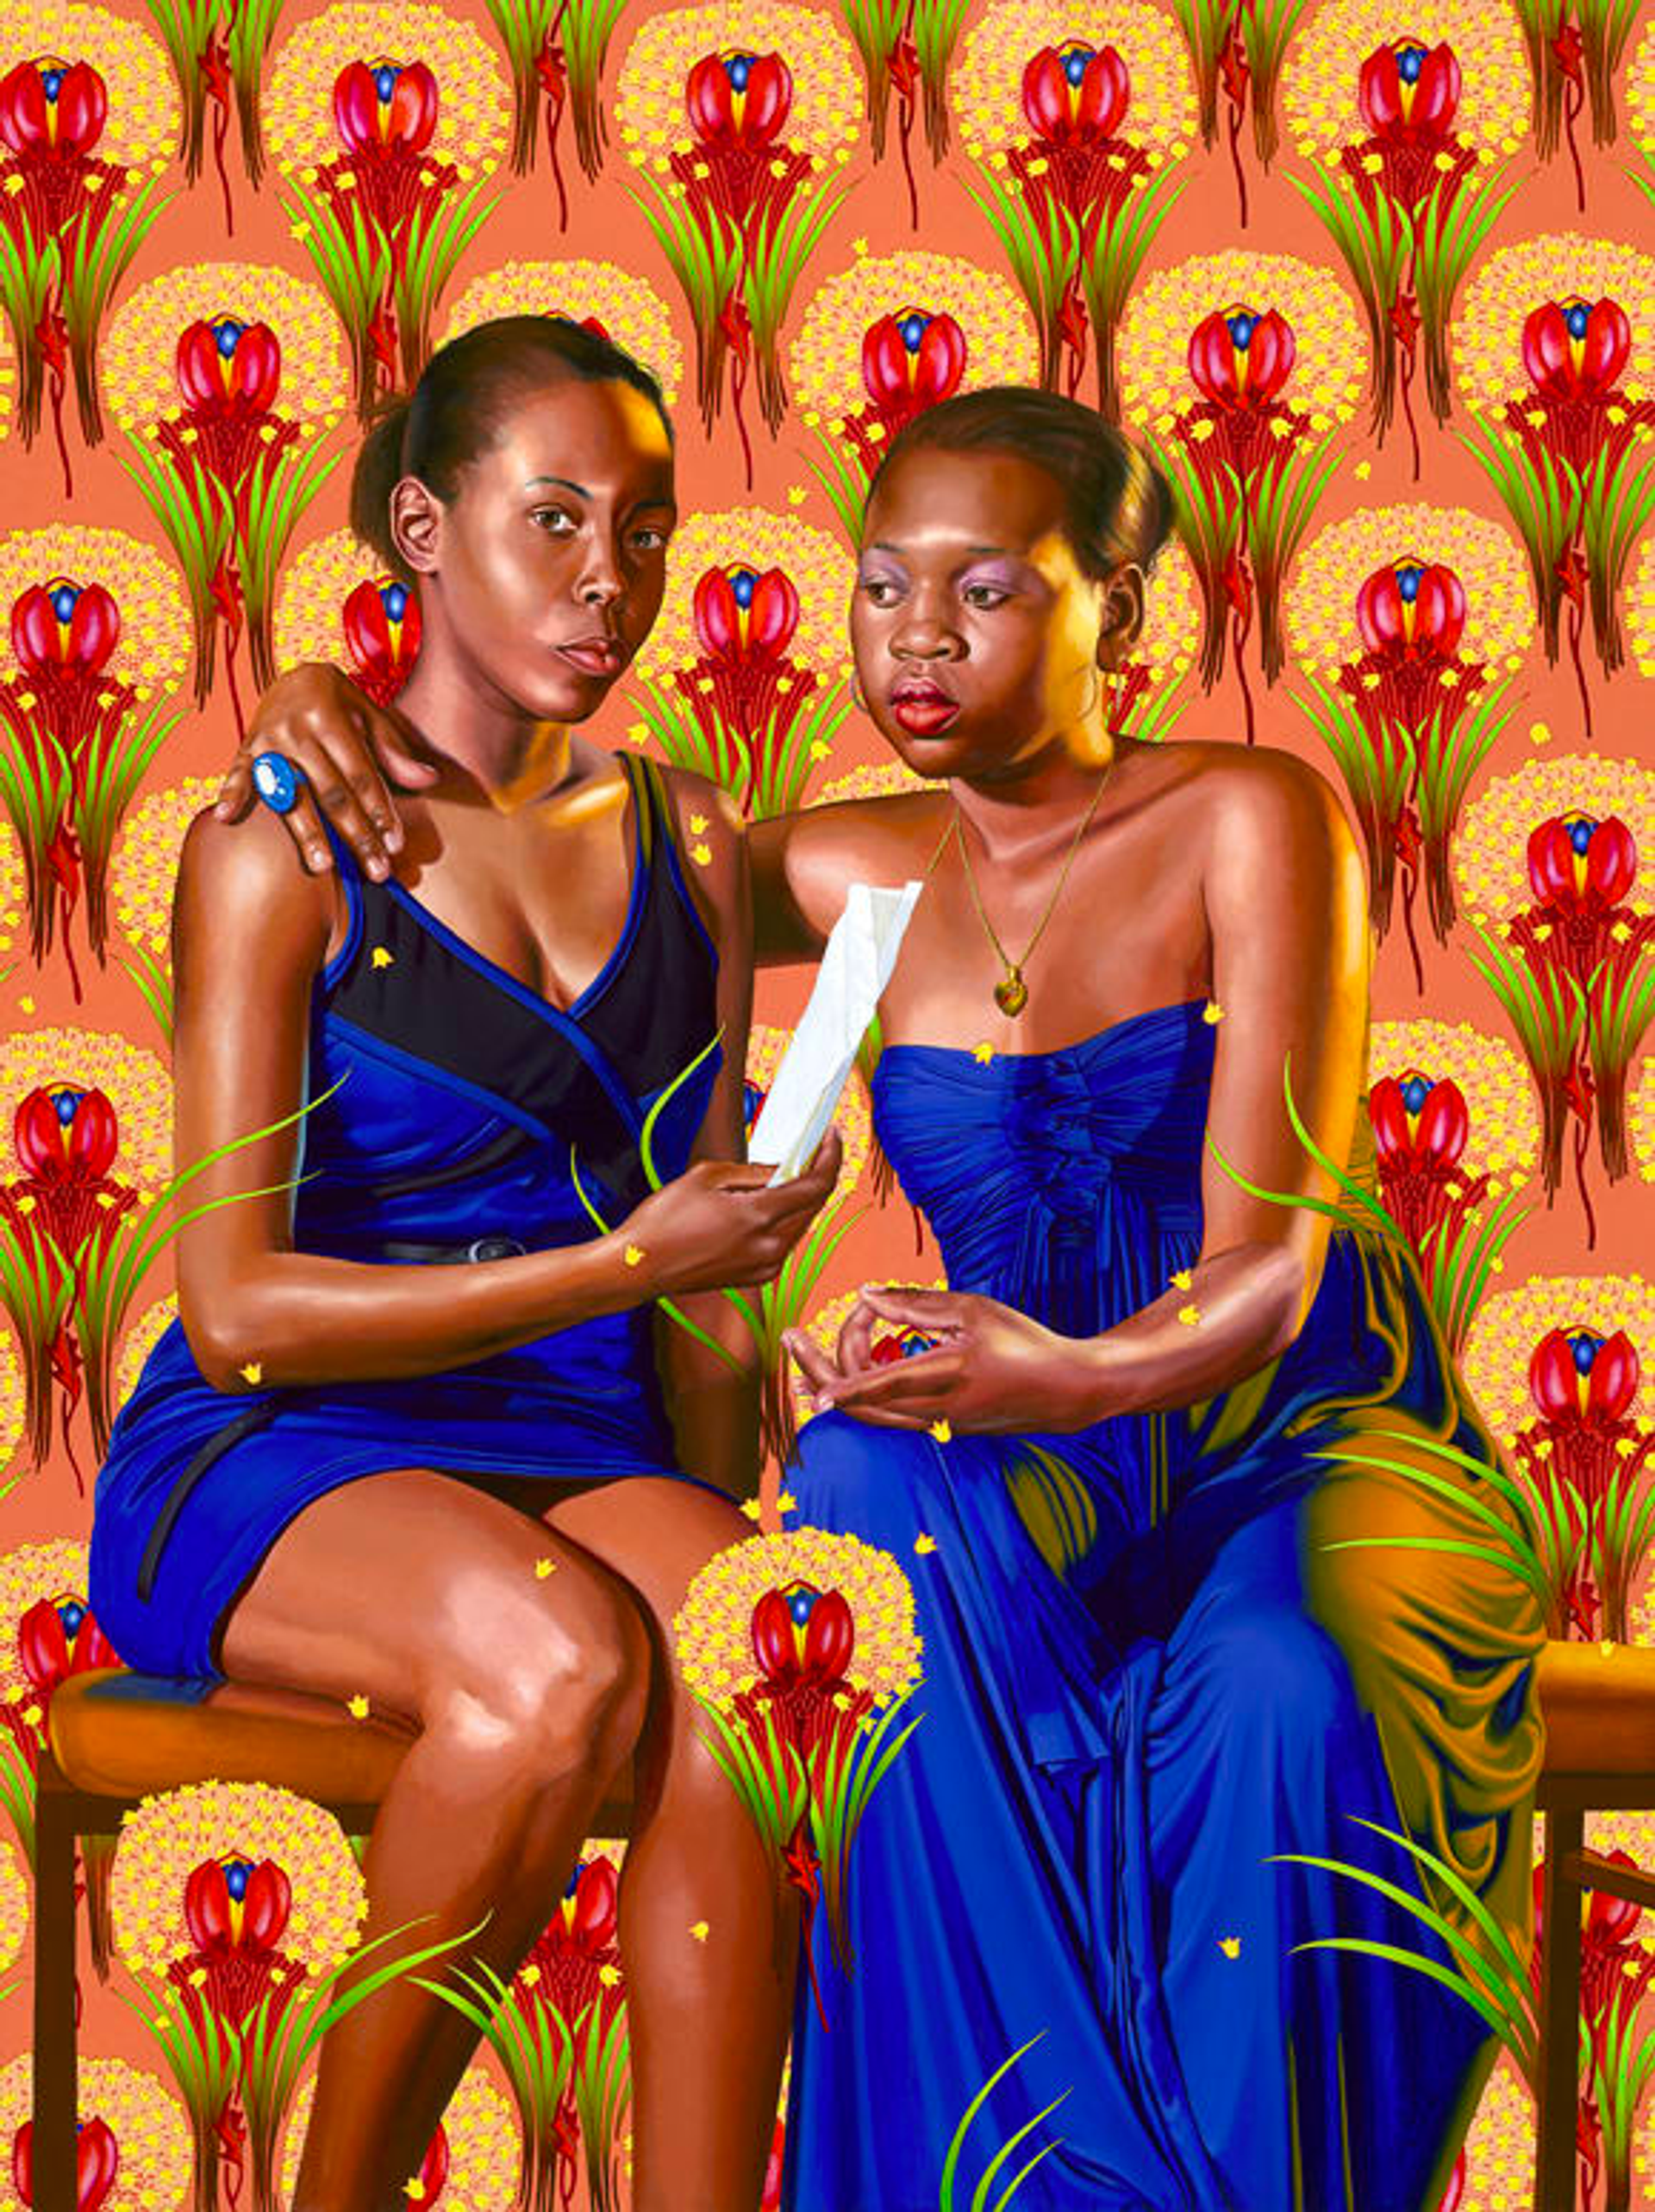 Two black women seated, one facing the viewer, the other looking at a scroll held by the woman on the right. They embrace with the woman on the right's arm around the other's shoulder. They wear blue dresses, seated against a vibrant orange backdrop with red floral wallpaper.